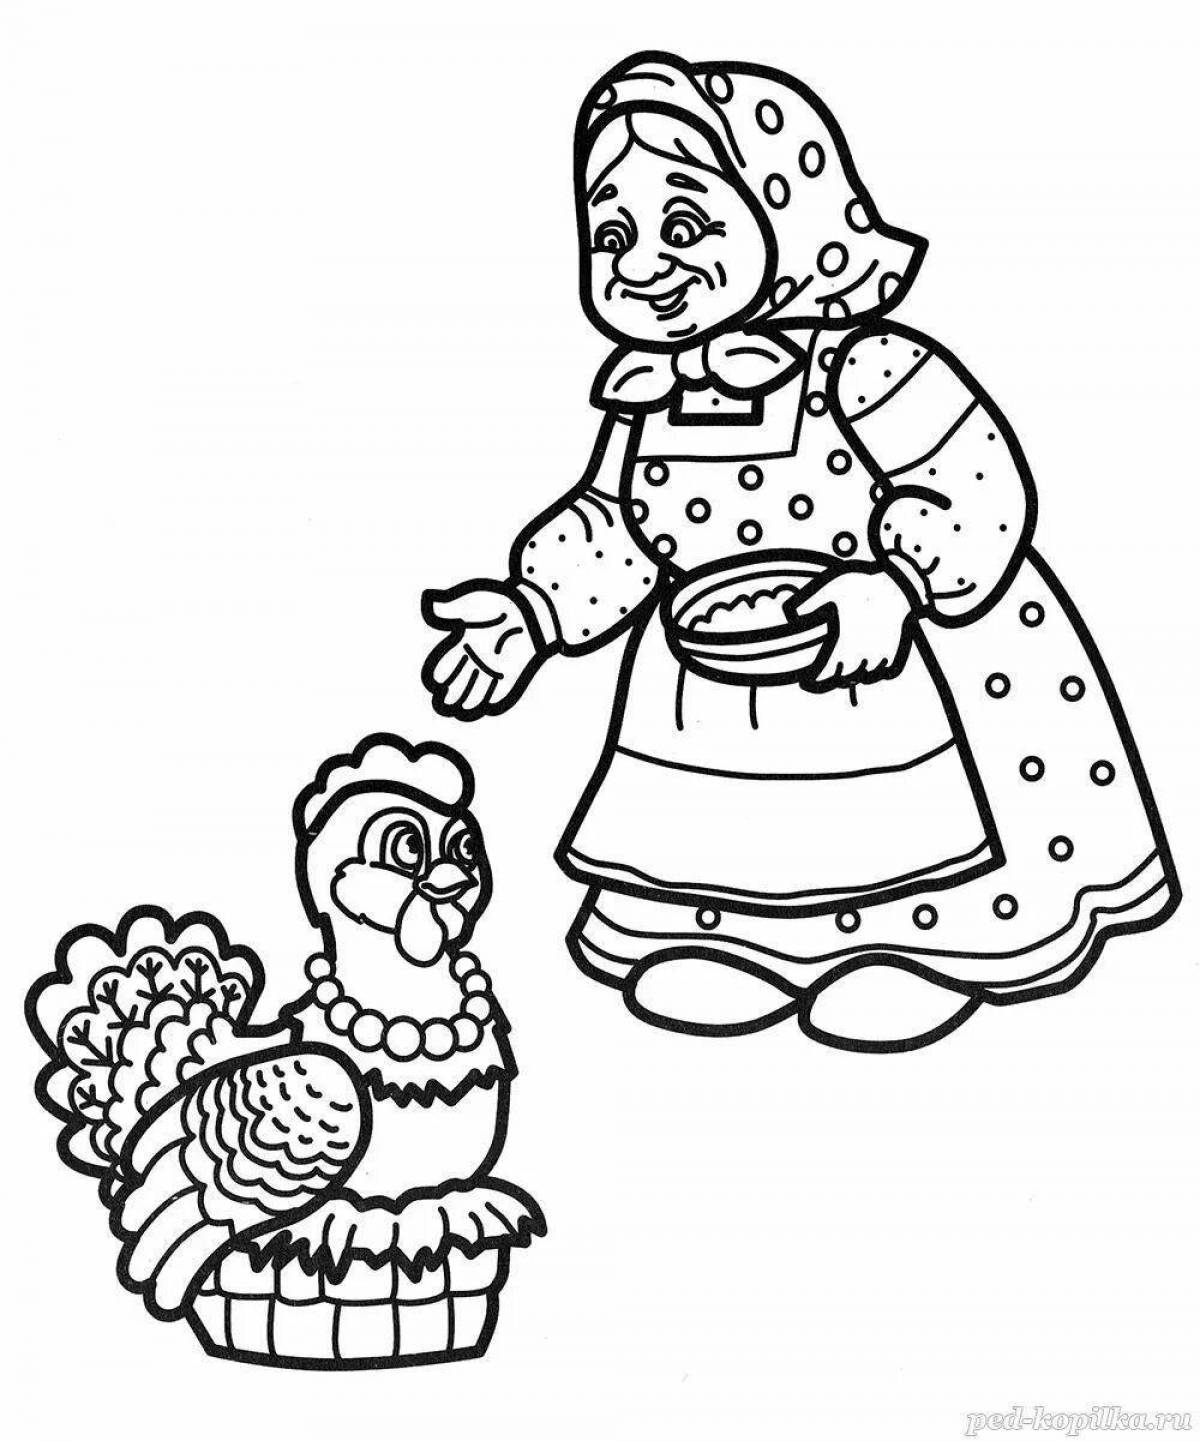 Fancy chicken pockmarked coloring book for kids